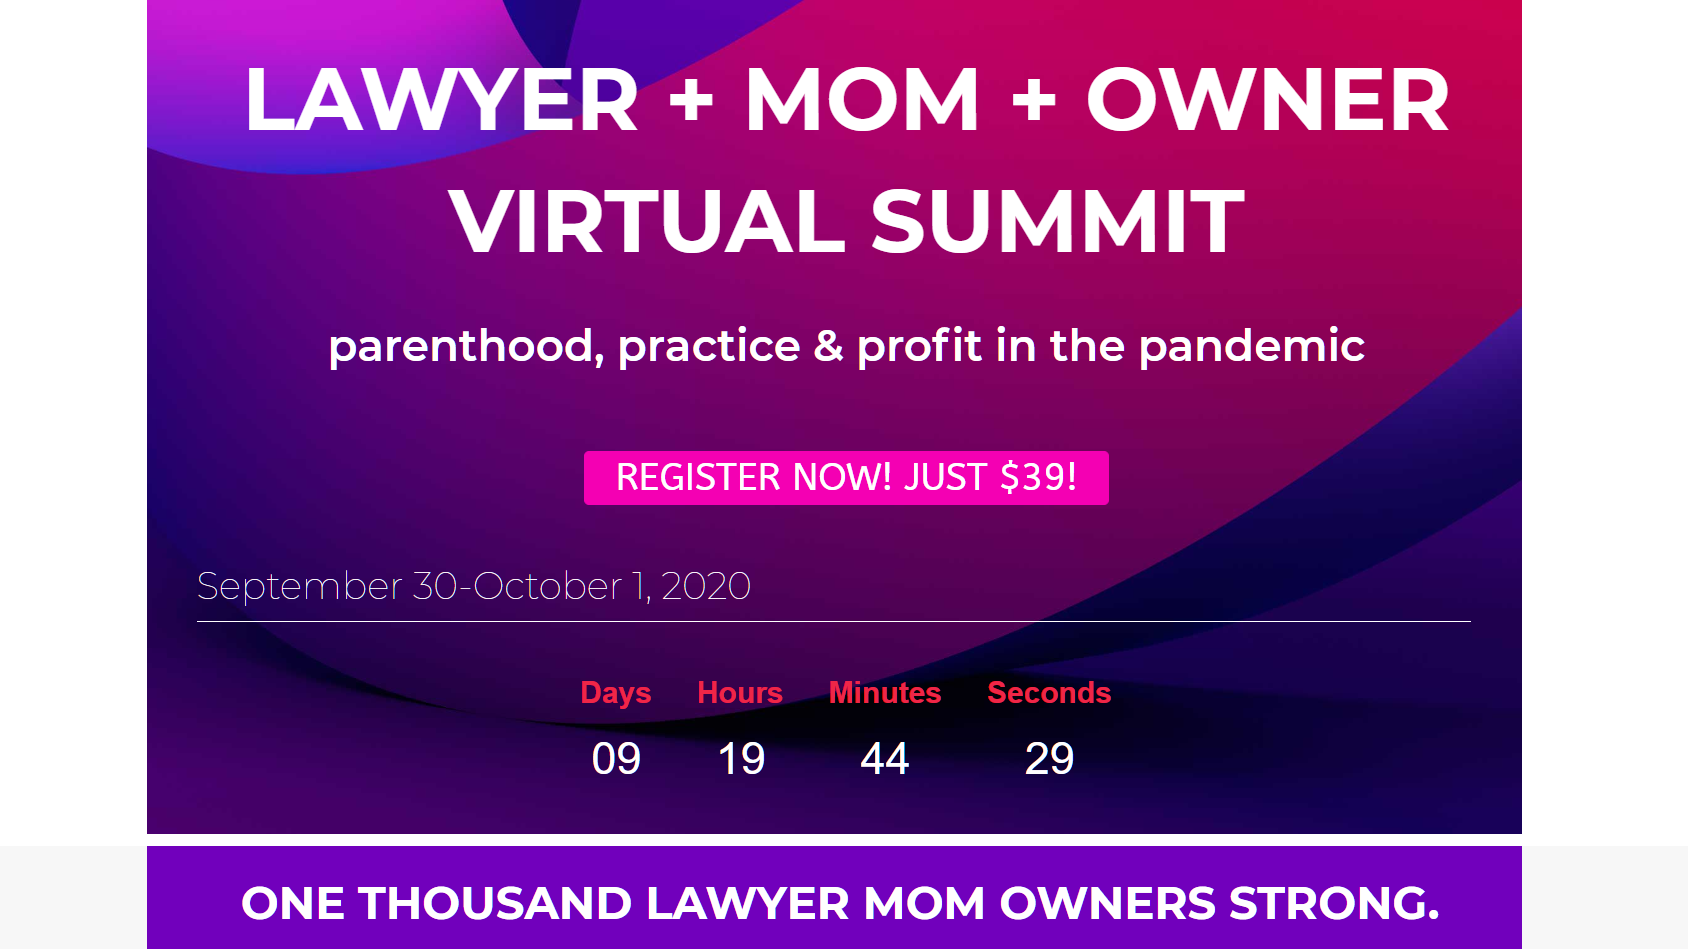 The Lawyer+Mom+Owner Summit: Interview with the Organizers on Why You Should Attend